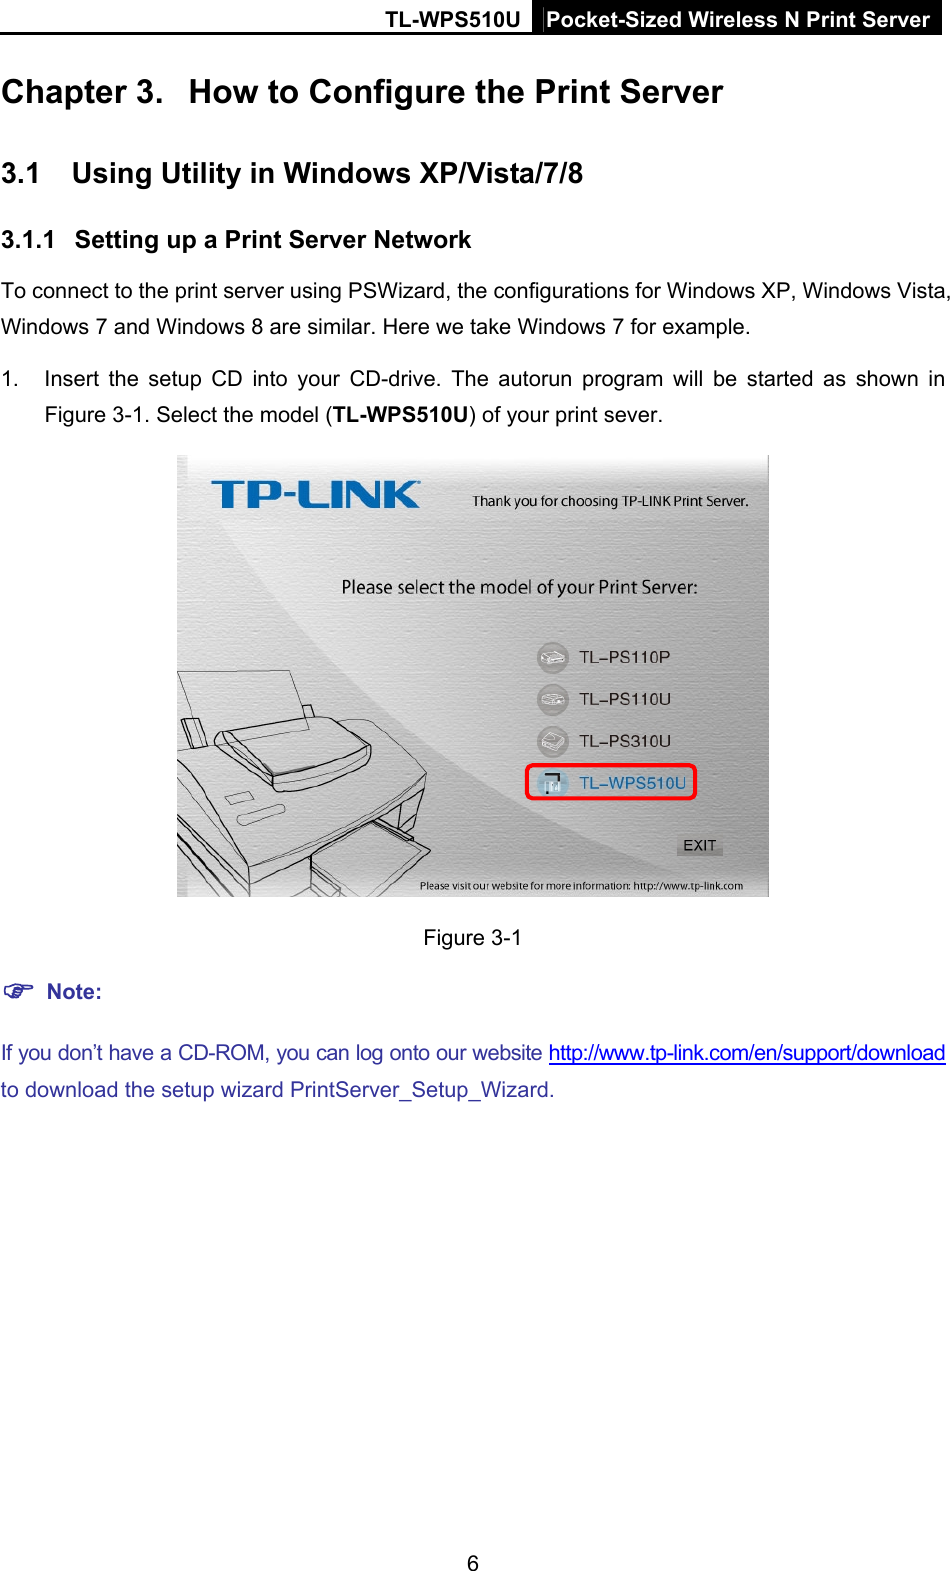 TL-WPS510U Pocket-Sized Wireless N Print Server Chapter 3.  How to Configure the Print Server 3.1  Using Utility in Windows XP/Vista/7/8 3.1.1  Setting up a Print Server Network To connect to the print server using PSWizard, the configurations for Windows XP, Windows Vista, Windows 7 and Windows 8 are similar. Here we take Windows 7 for example. 1.  Insert the setup CD into your CD-drive. The autorun program will be started as shown in Figure 3-1. Select the model (TL-WPS510U) of your print sever.  Figure 3-1  Note: If you don’t have a CD-ROM, you can log onto our website http://www.tp-link.com/en/support/download to download the setup wizard PrintServer_Setup_Wizard. 6 